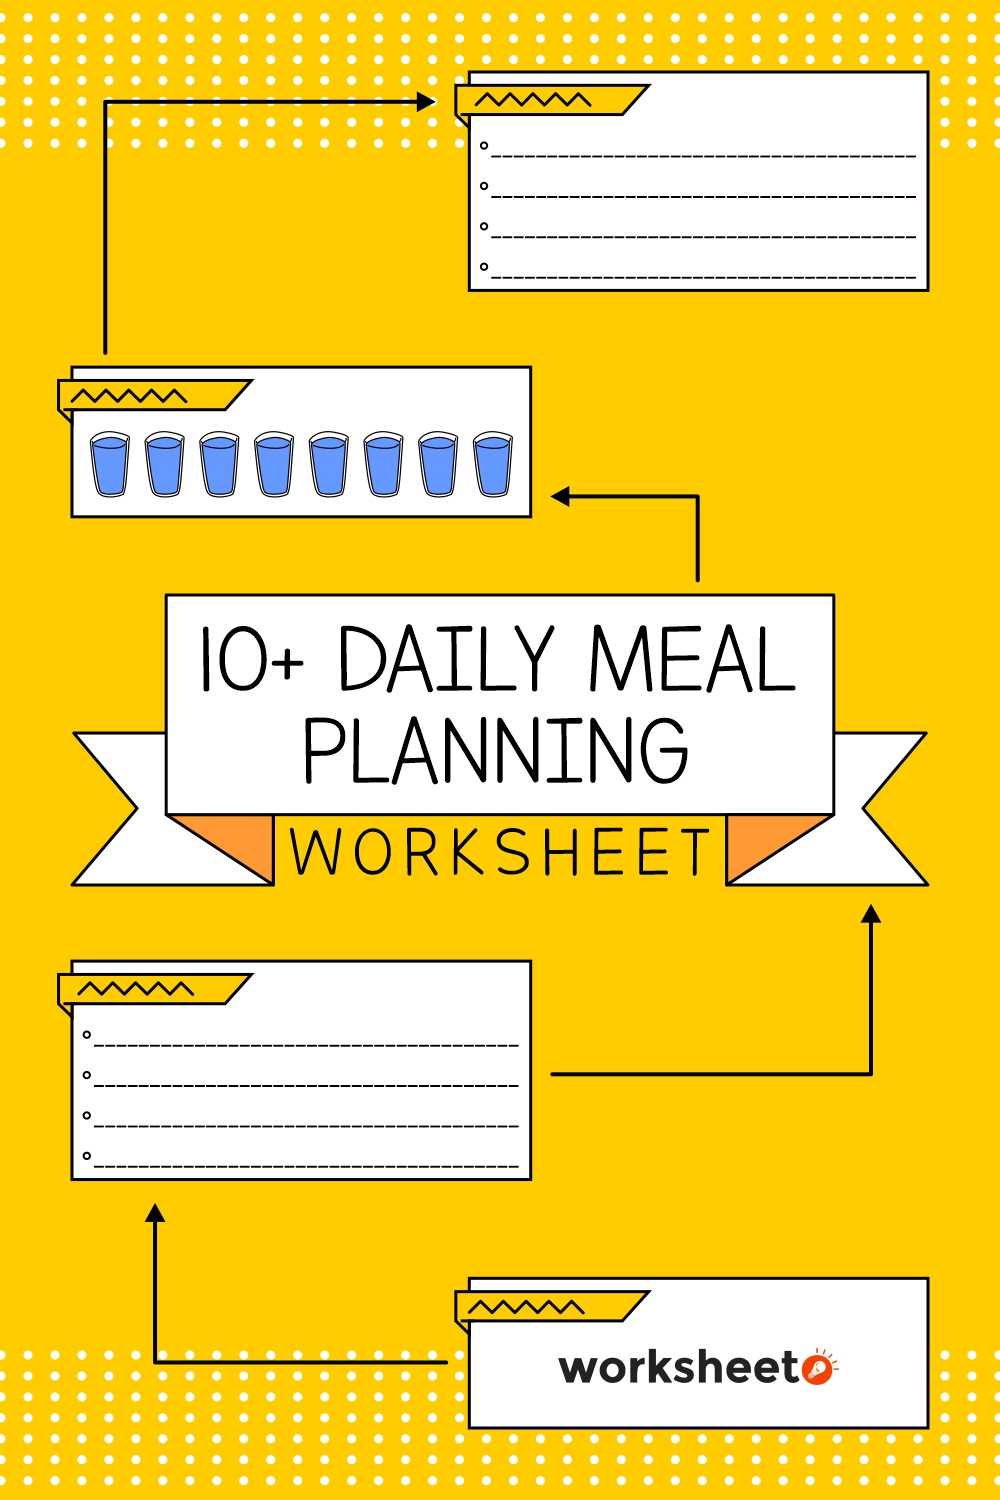 18 Images of Daily Meal Planning Worksheet